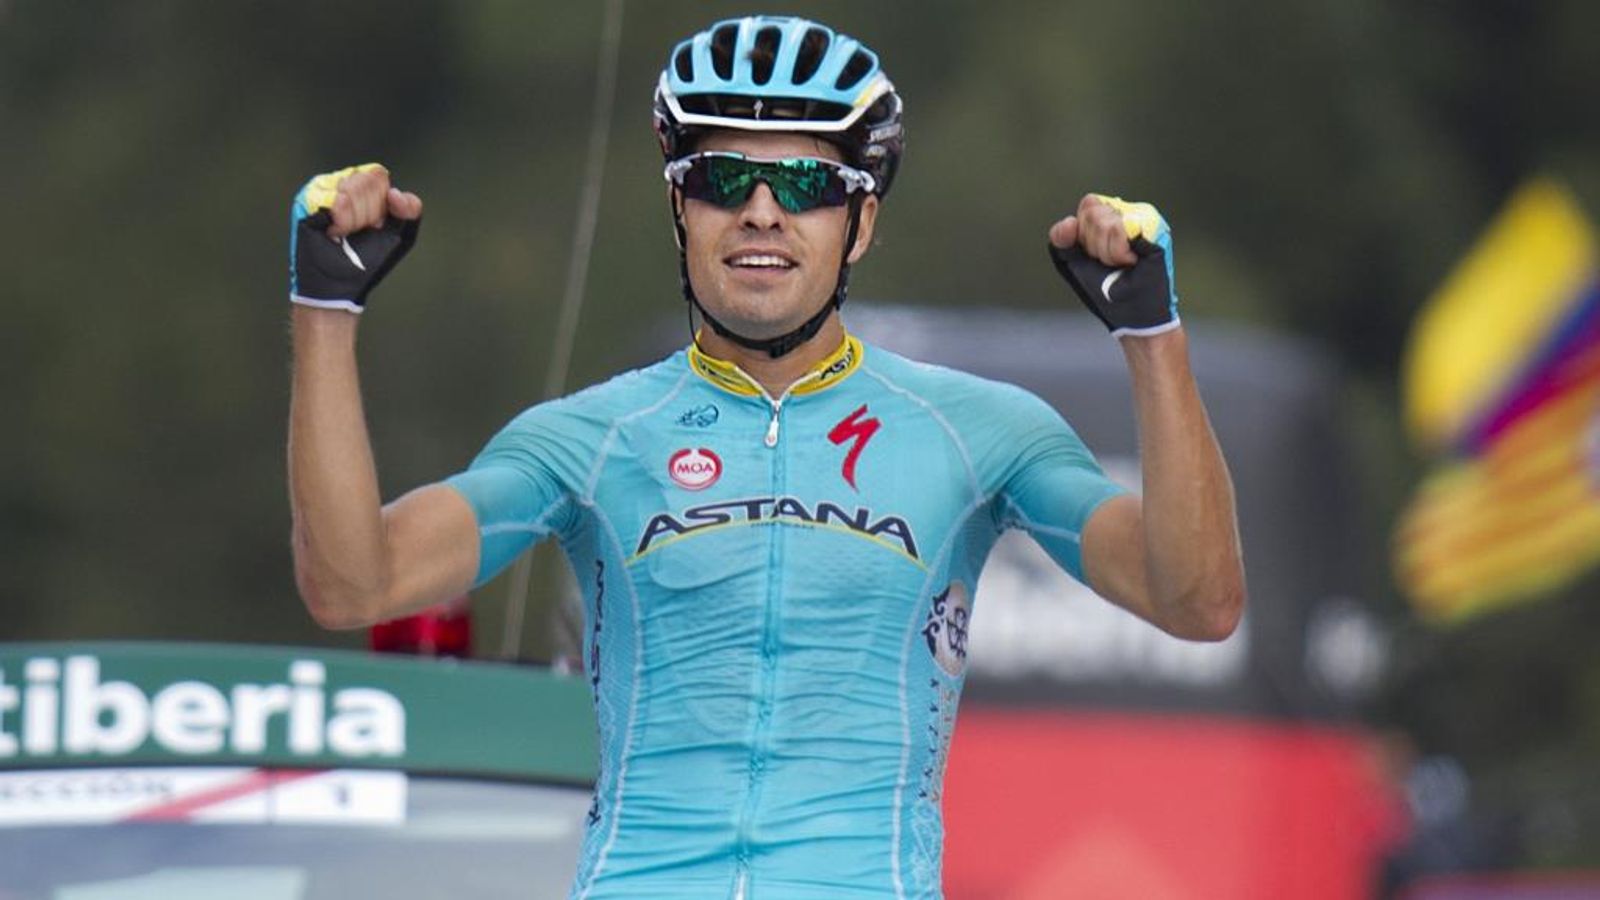 Mikel Landa to join Team Sky from rivals Astana | Cycling News | Sky Sports